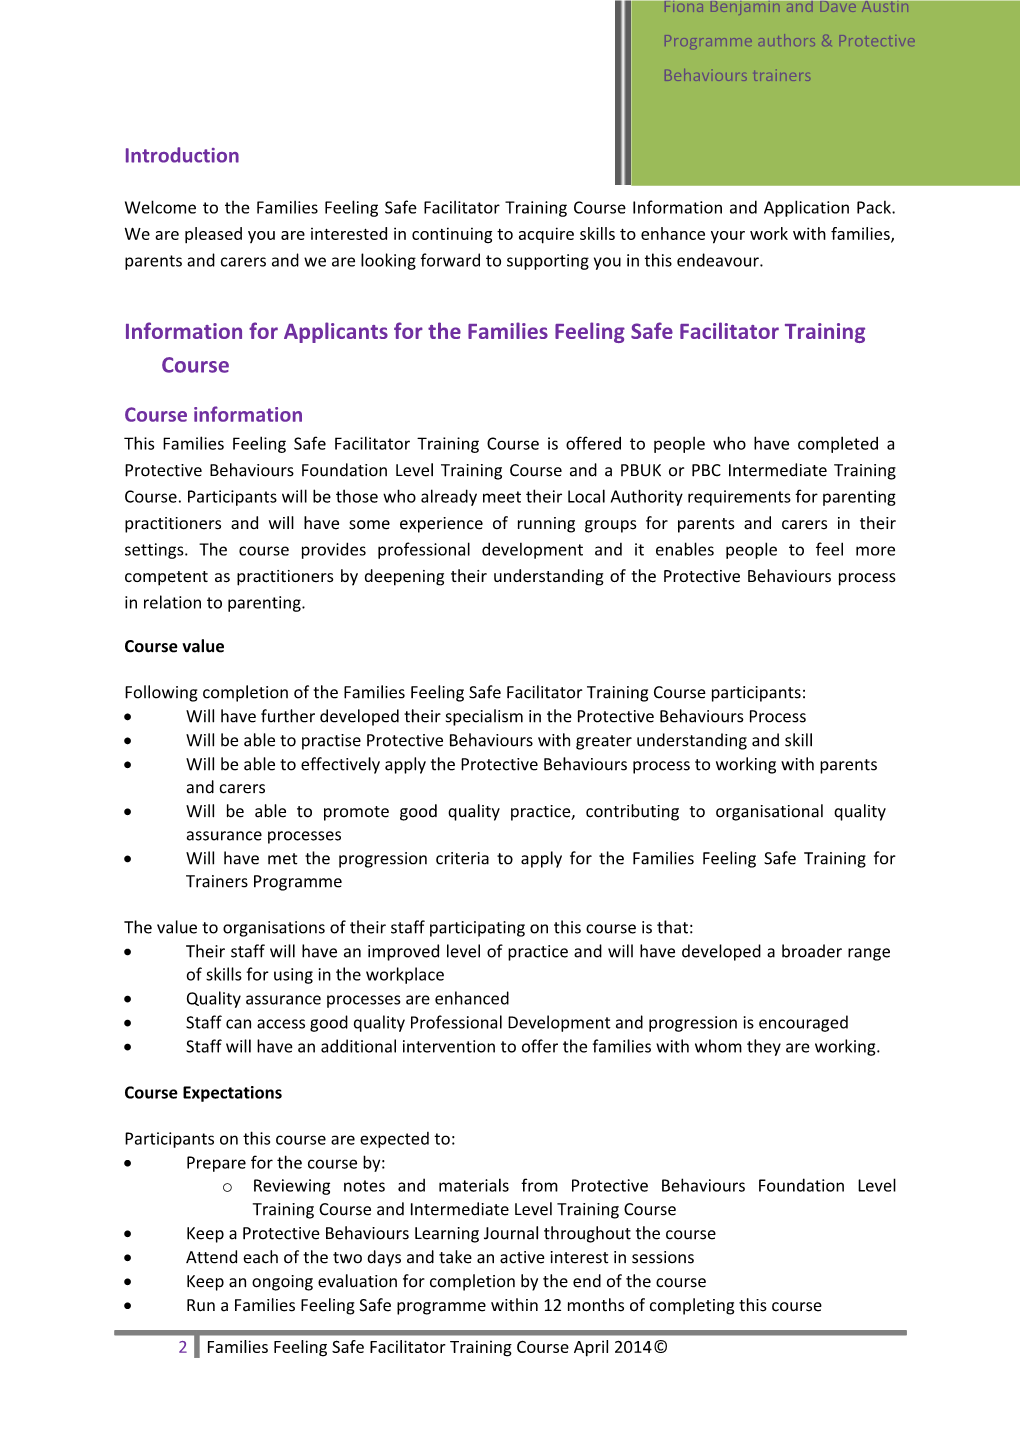 Information and Application Pack PBUK Training for Trainers